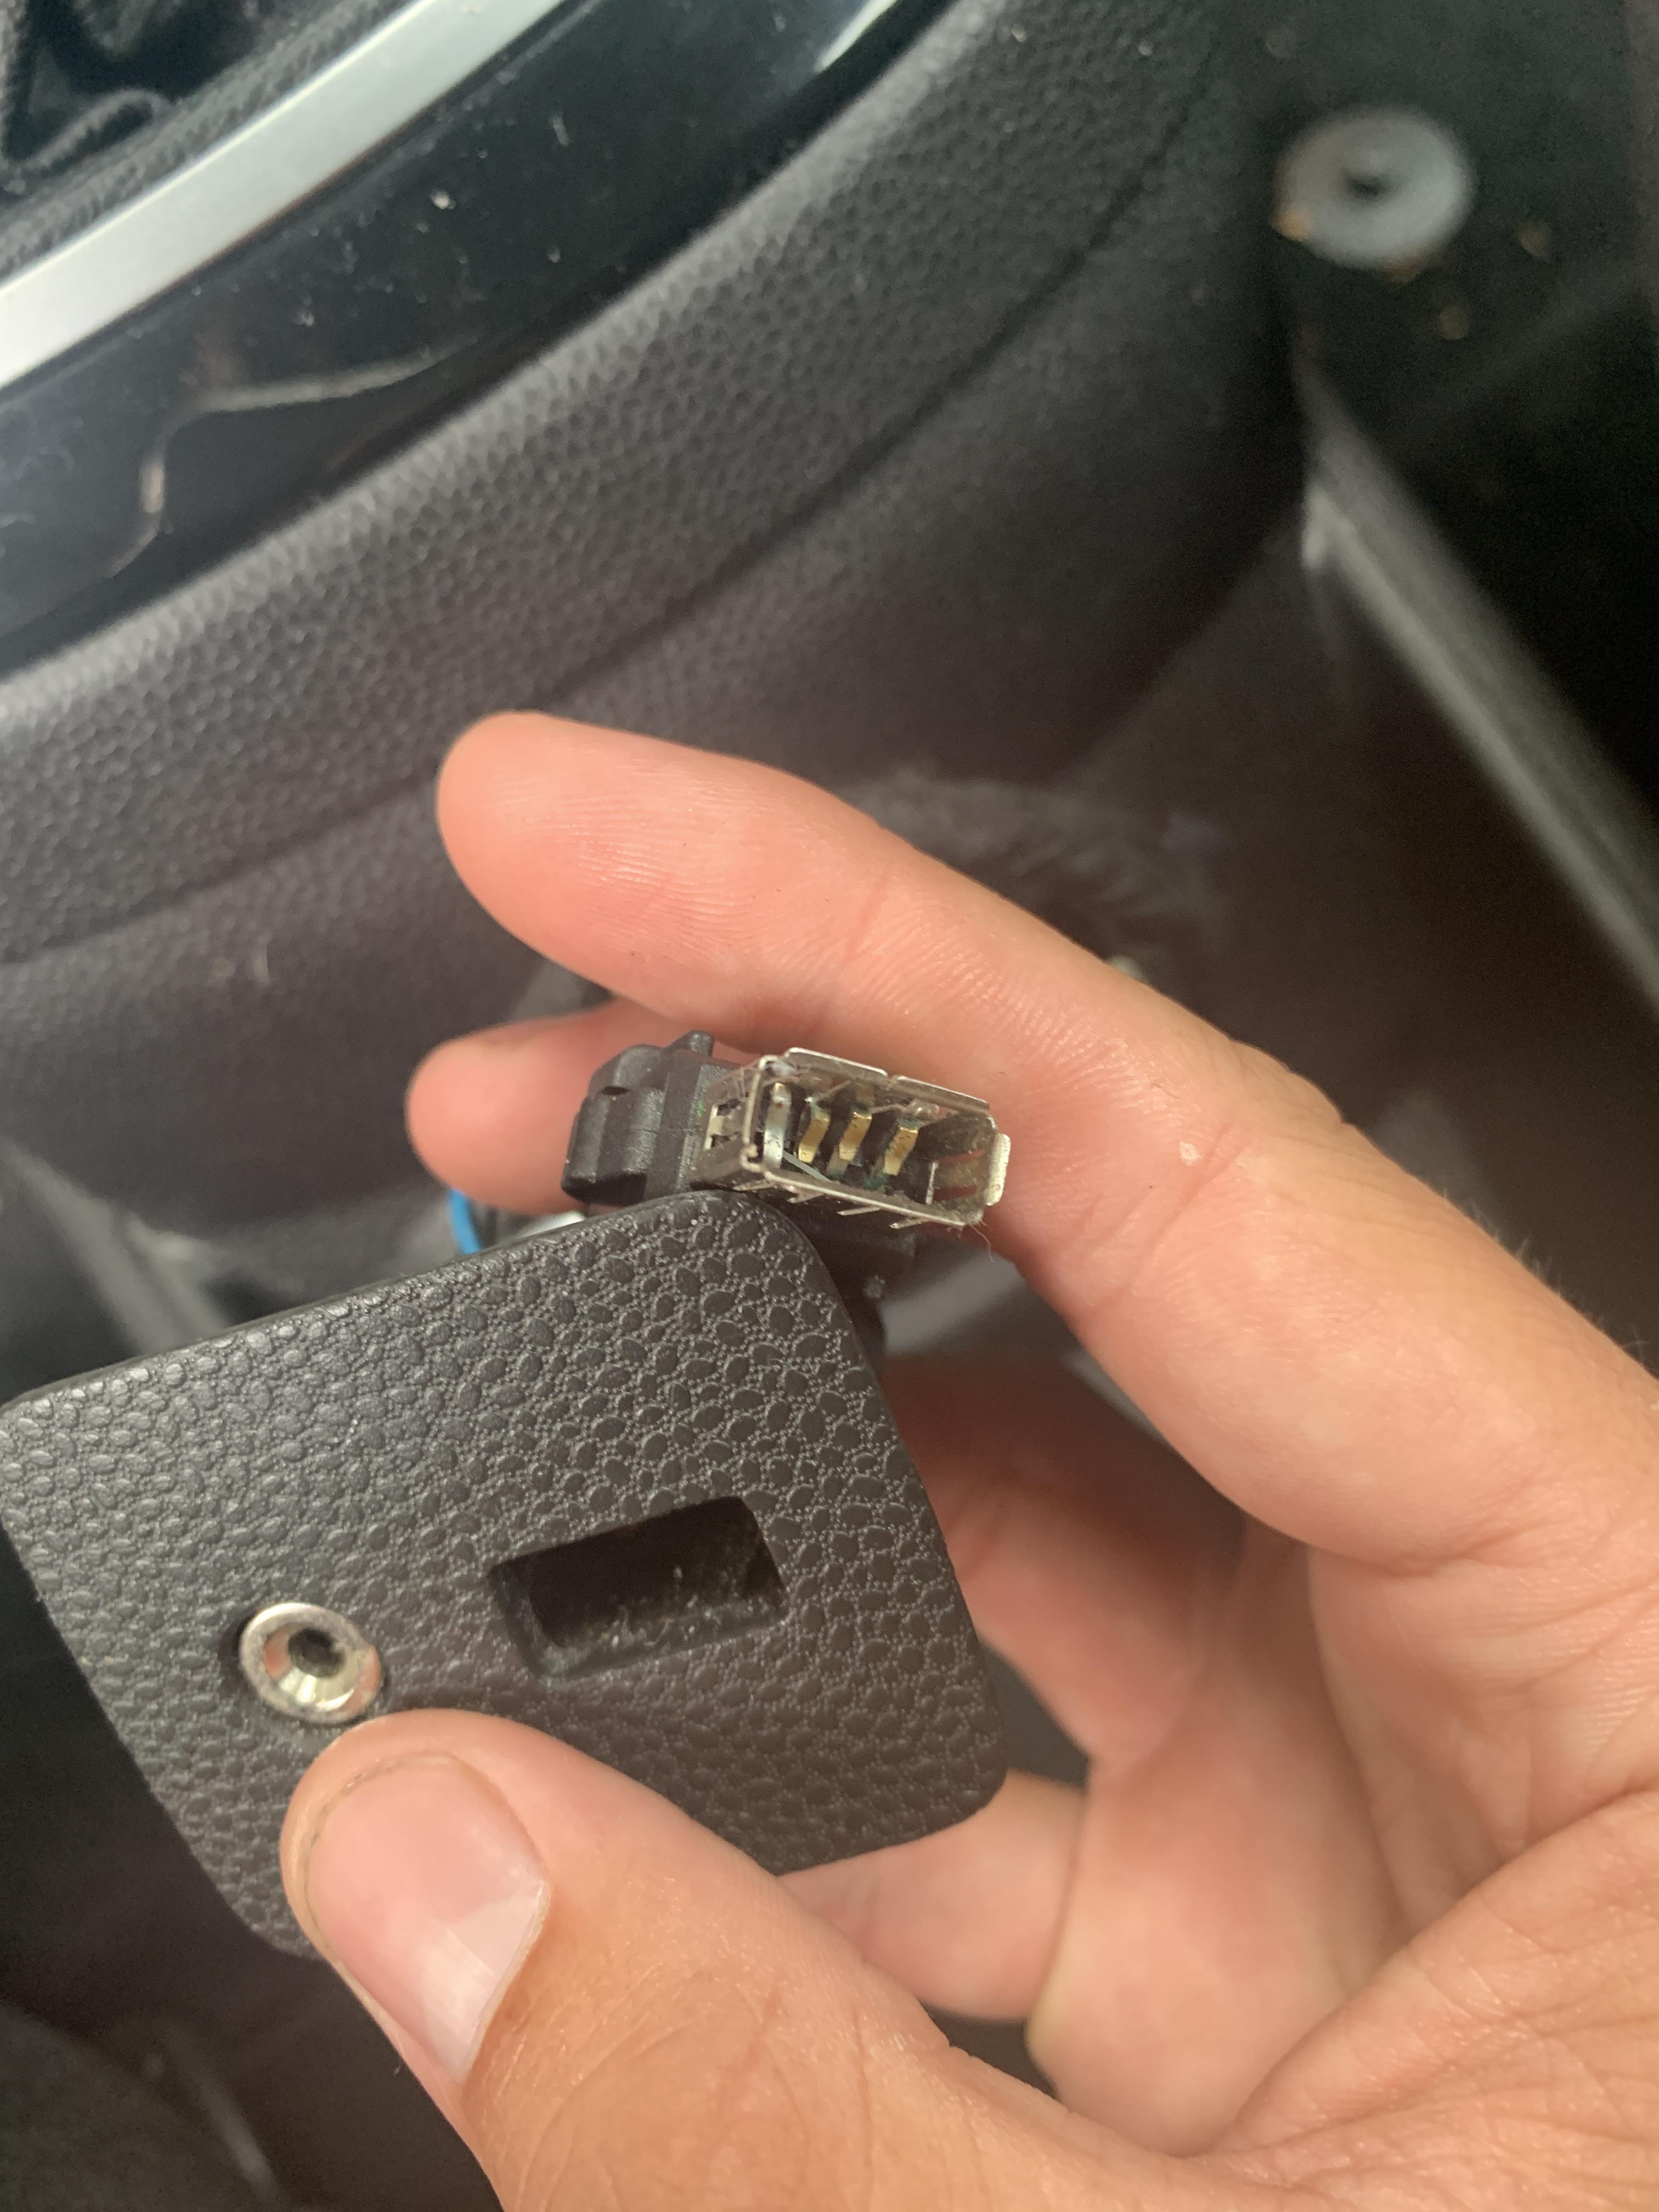 USB Port Replacement Ford Fiesta Club - Ford Owners Club - Ford